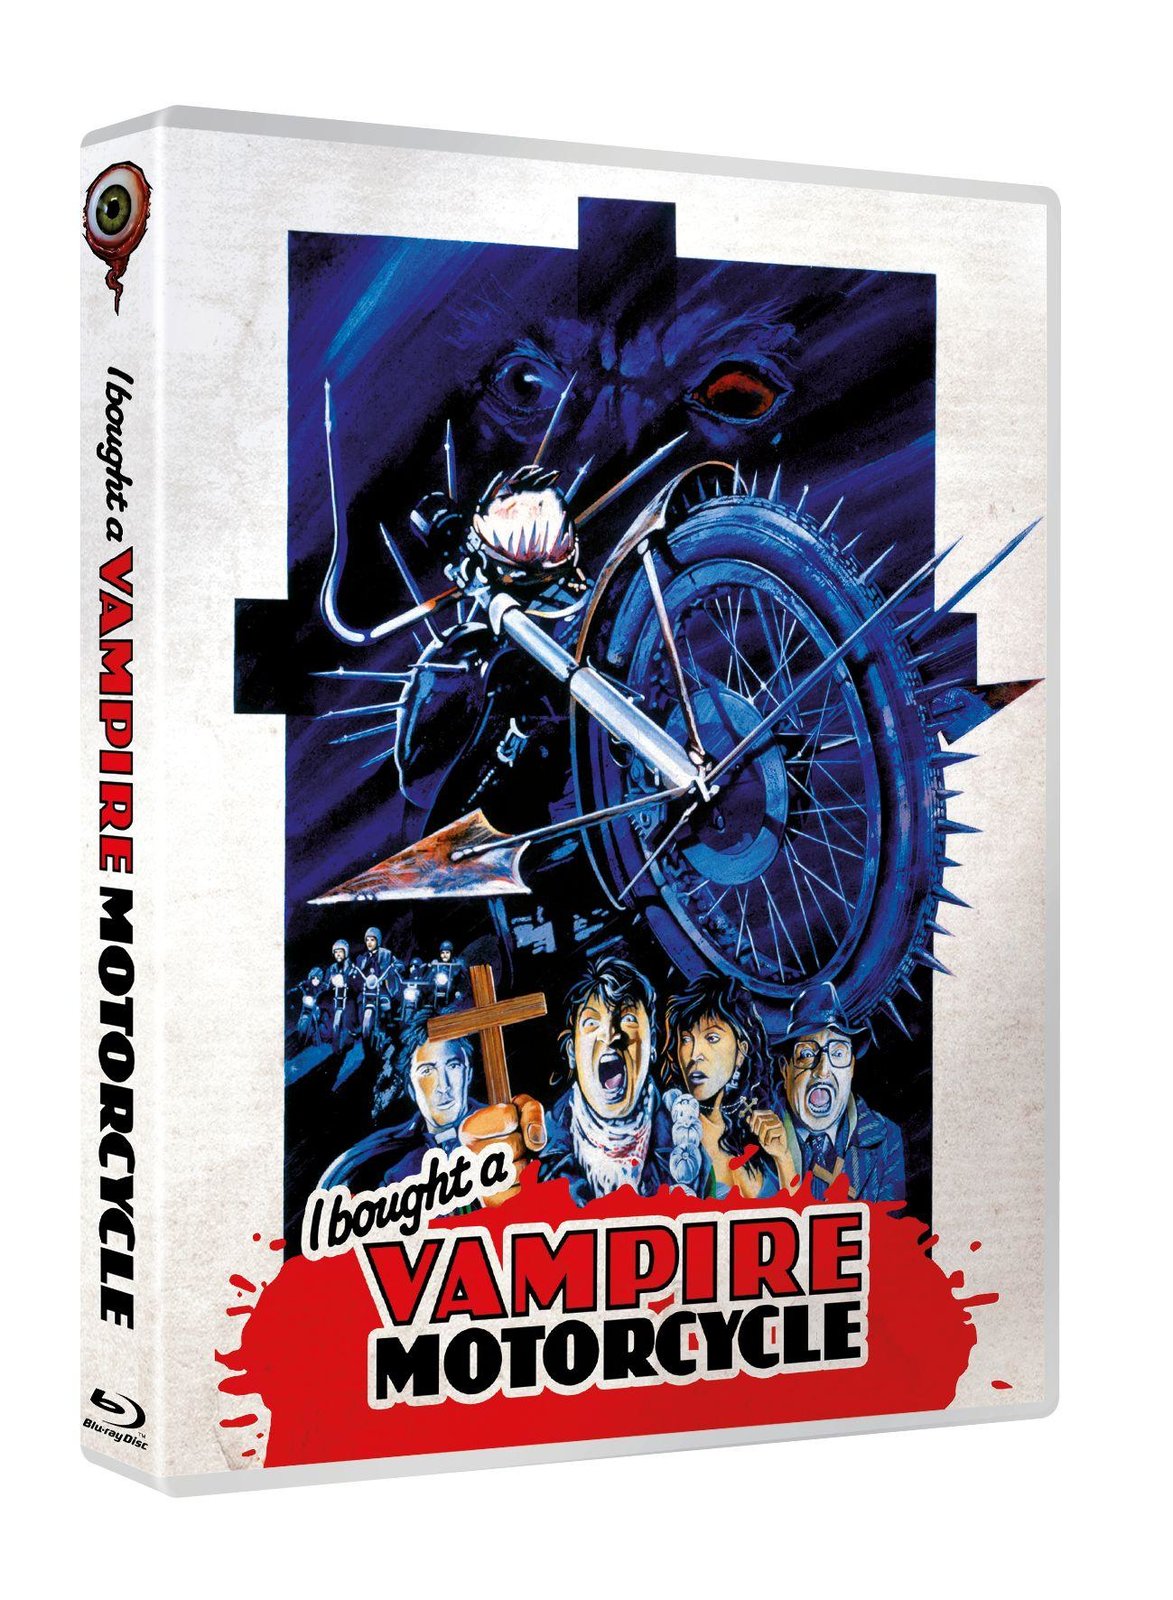 I Bought a Vampire Motorcycle - Uncut Edition (DVD+blu-ray)